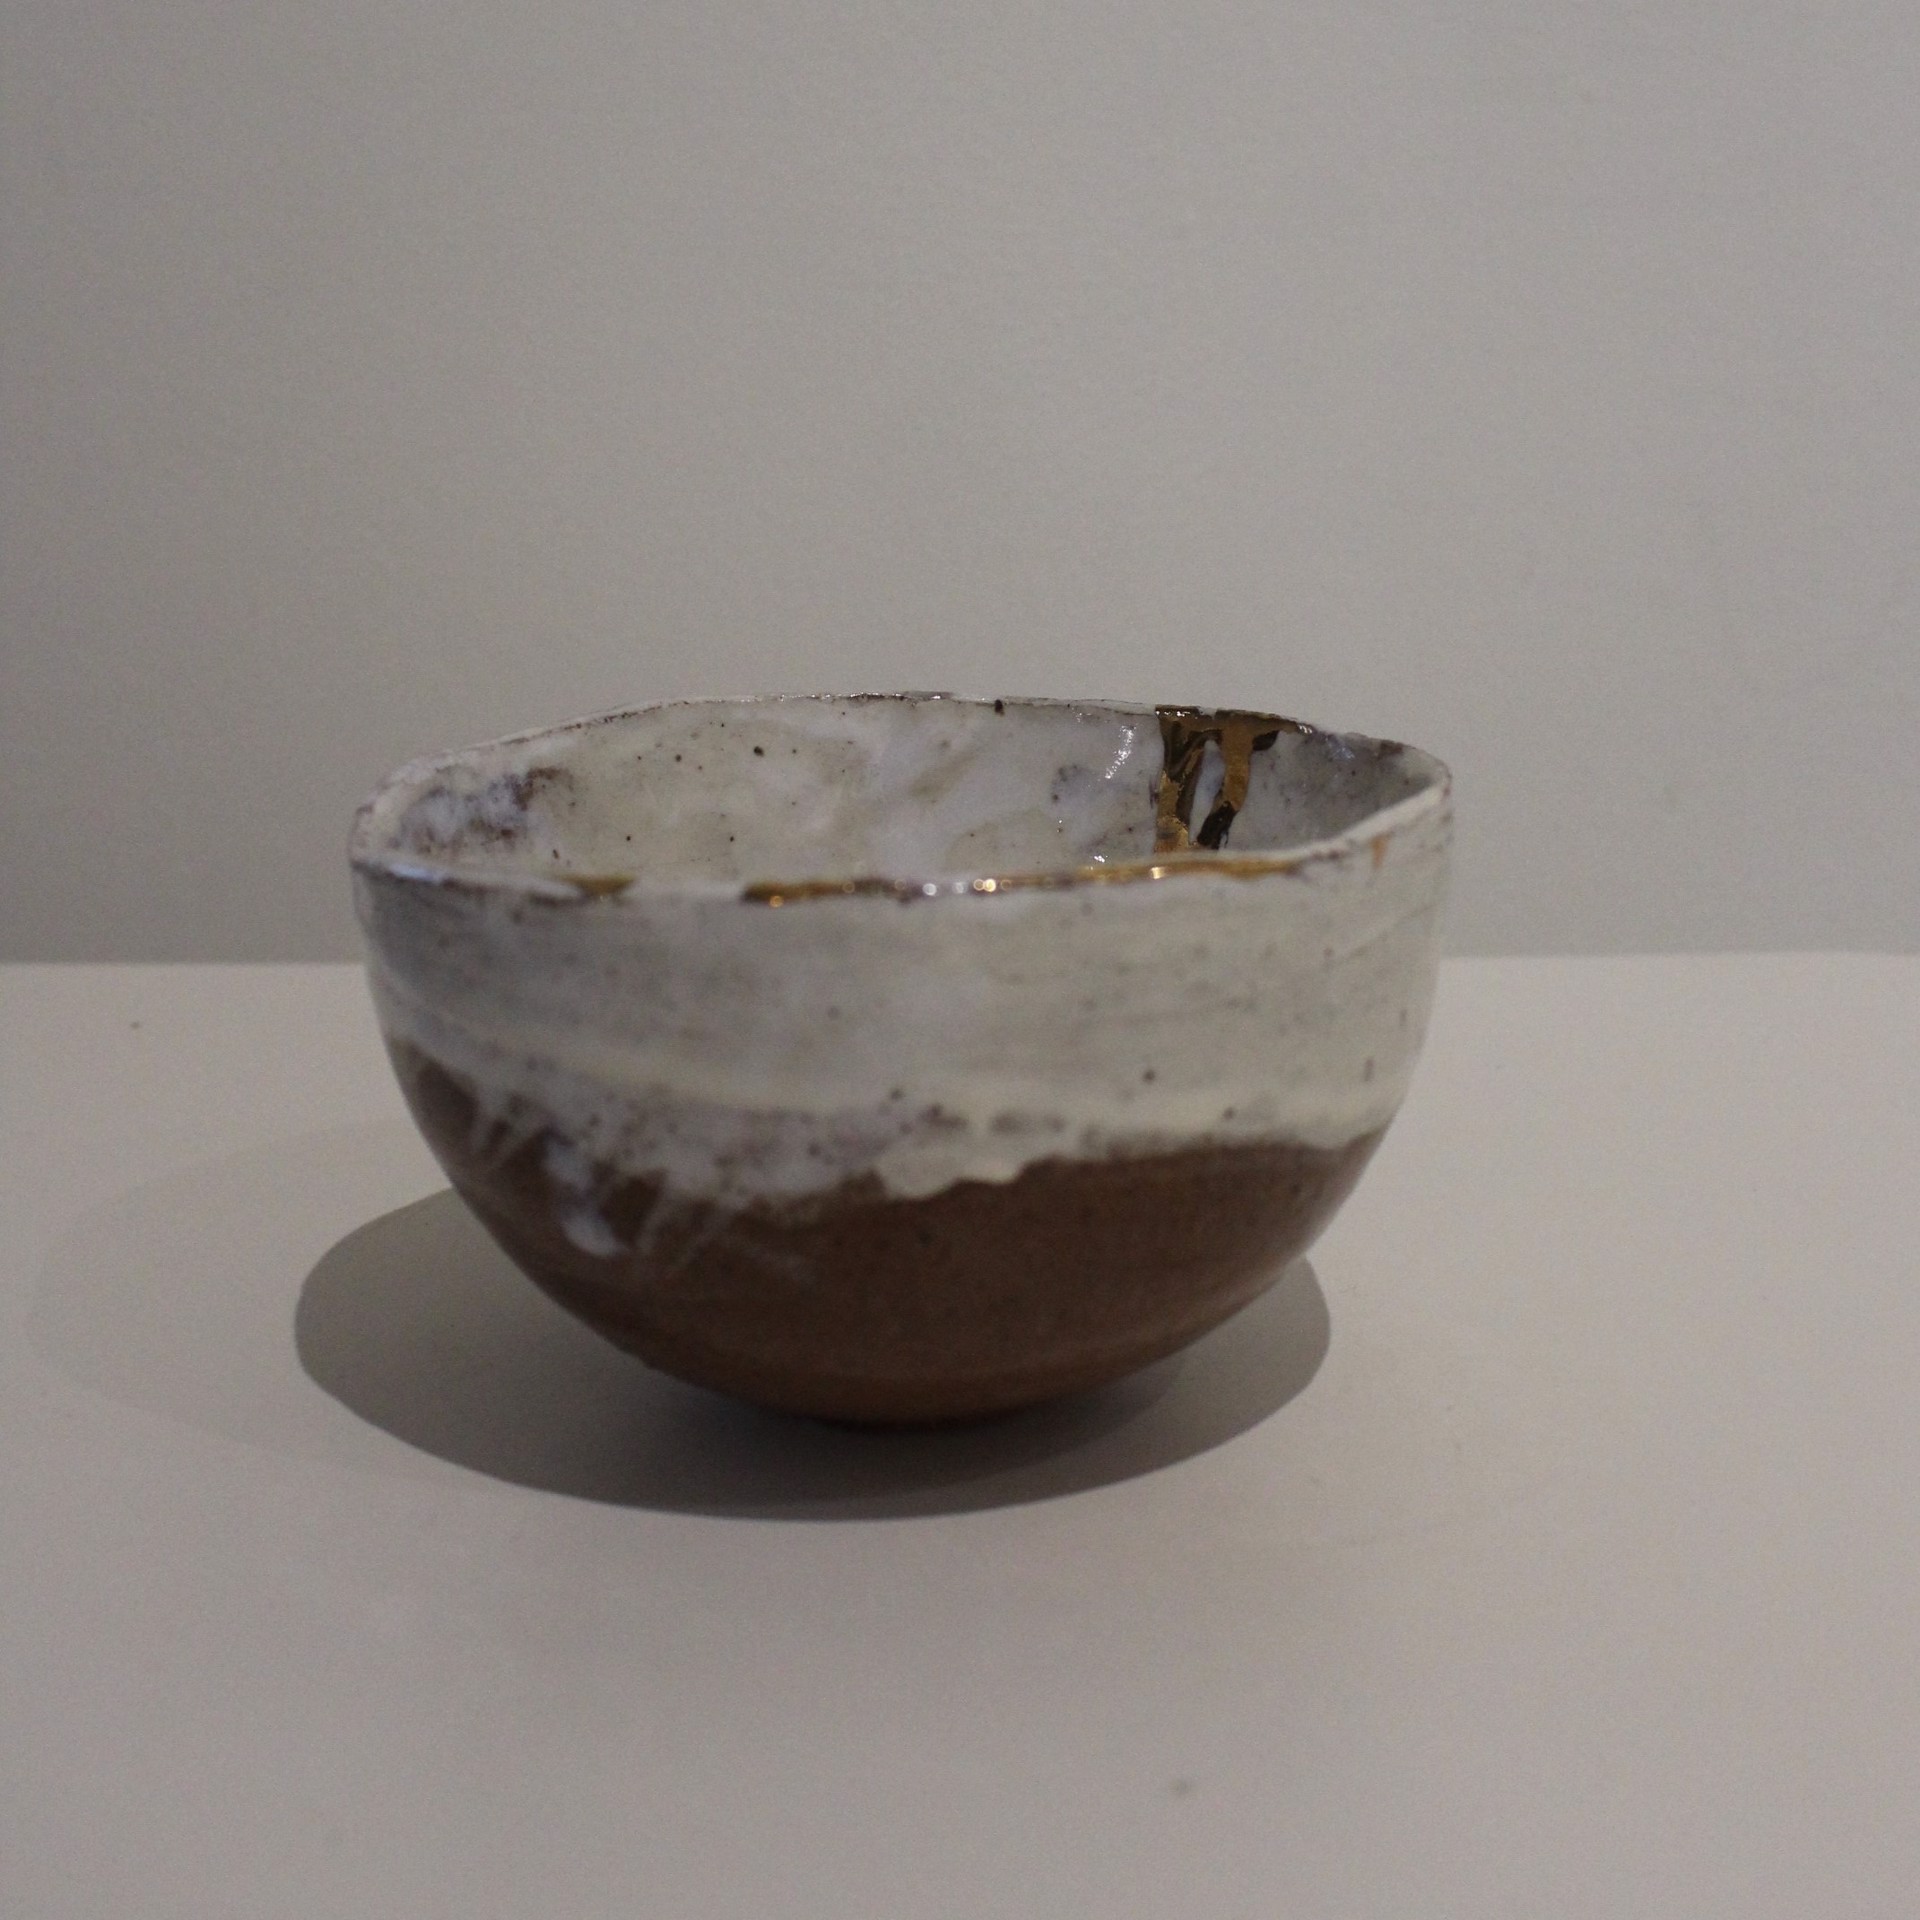 Tea Bowl 3 (creative) by Therese Knowles